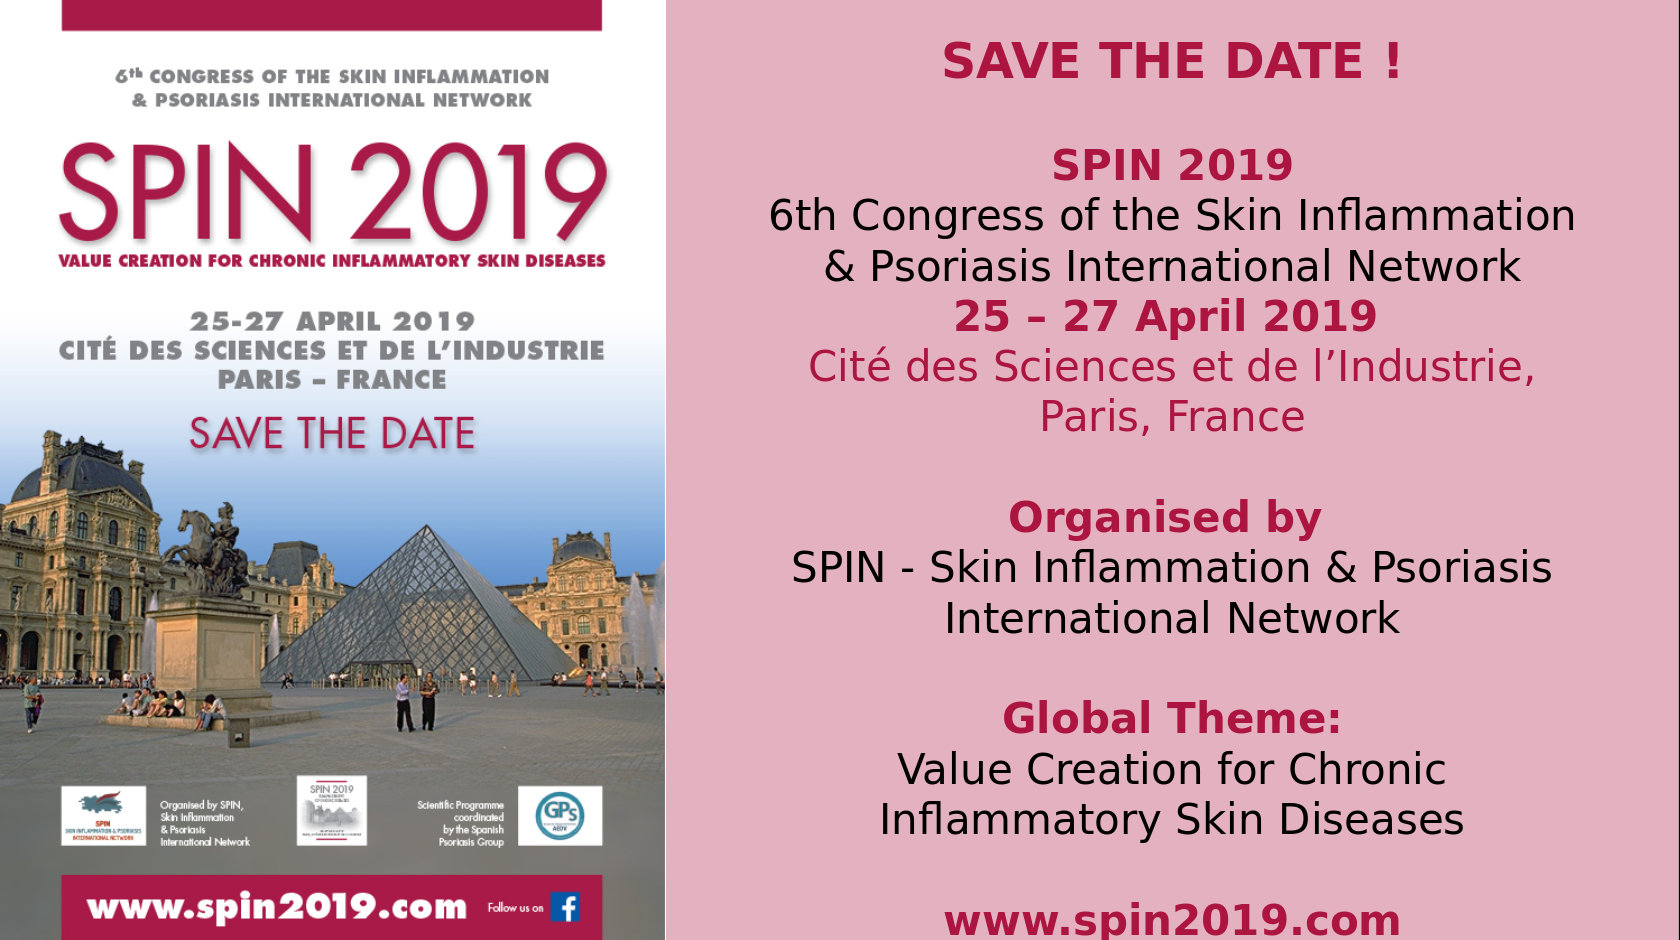 6th CONGRESS OF THE SPIN - SKIN INFLAMMATION & PSORIASIS INTERNATIONAL NETWORK